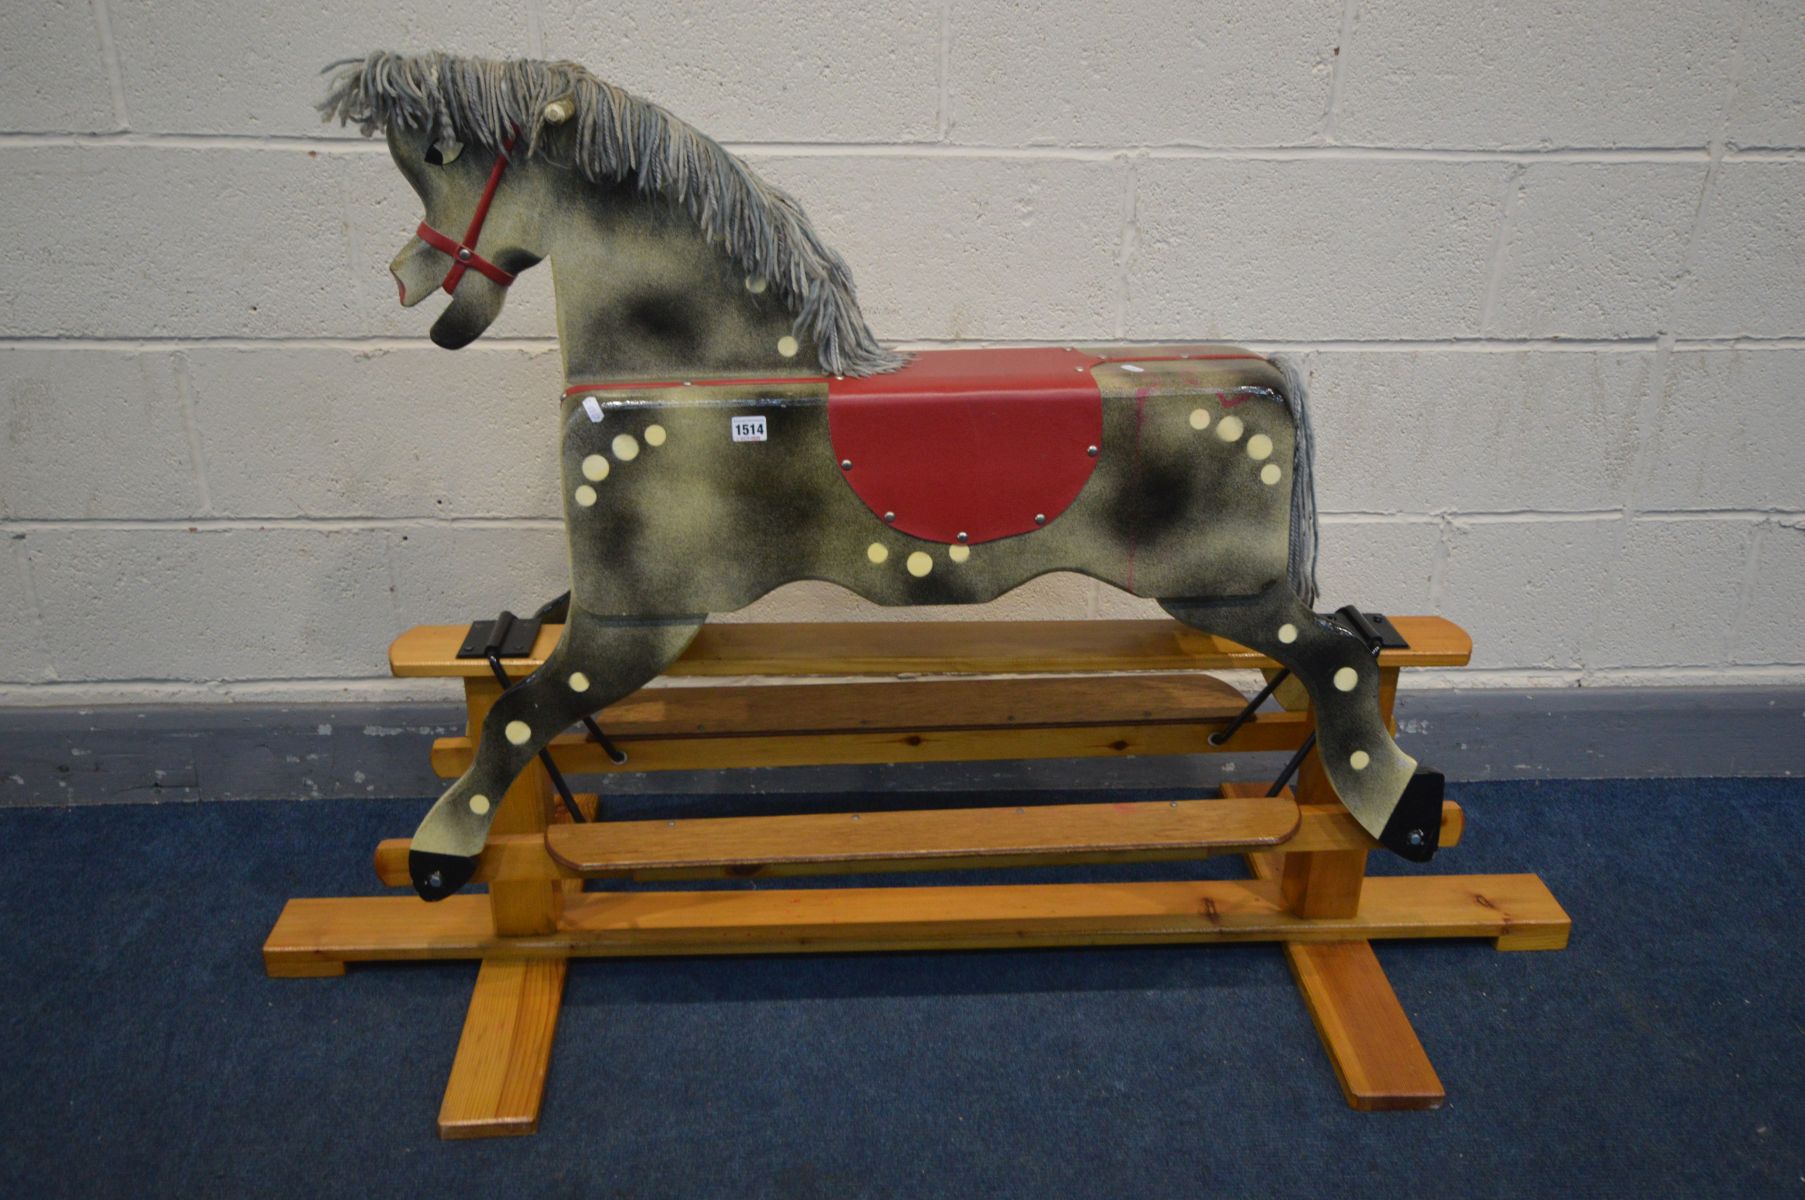 A BESPOKE TRESTLE ROCKING HORSE, on a pine stand, length 148cm x depth 59cm x height 97cm (condition